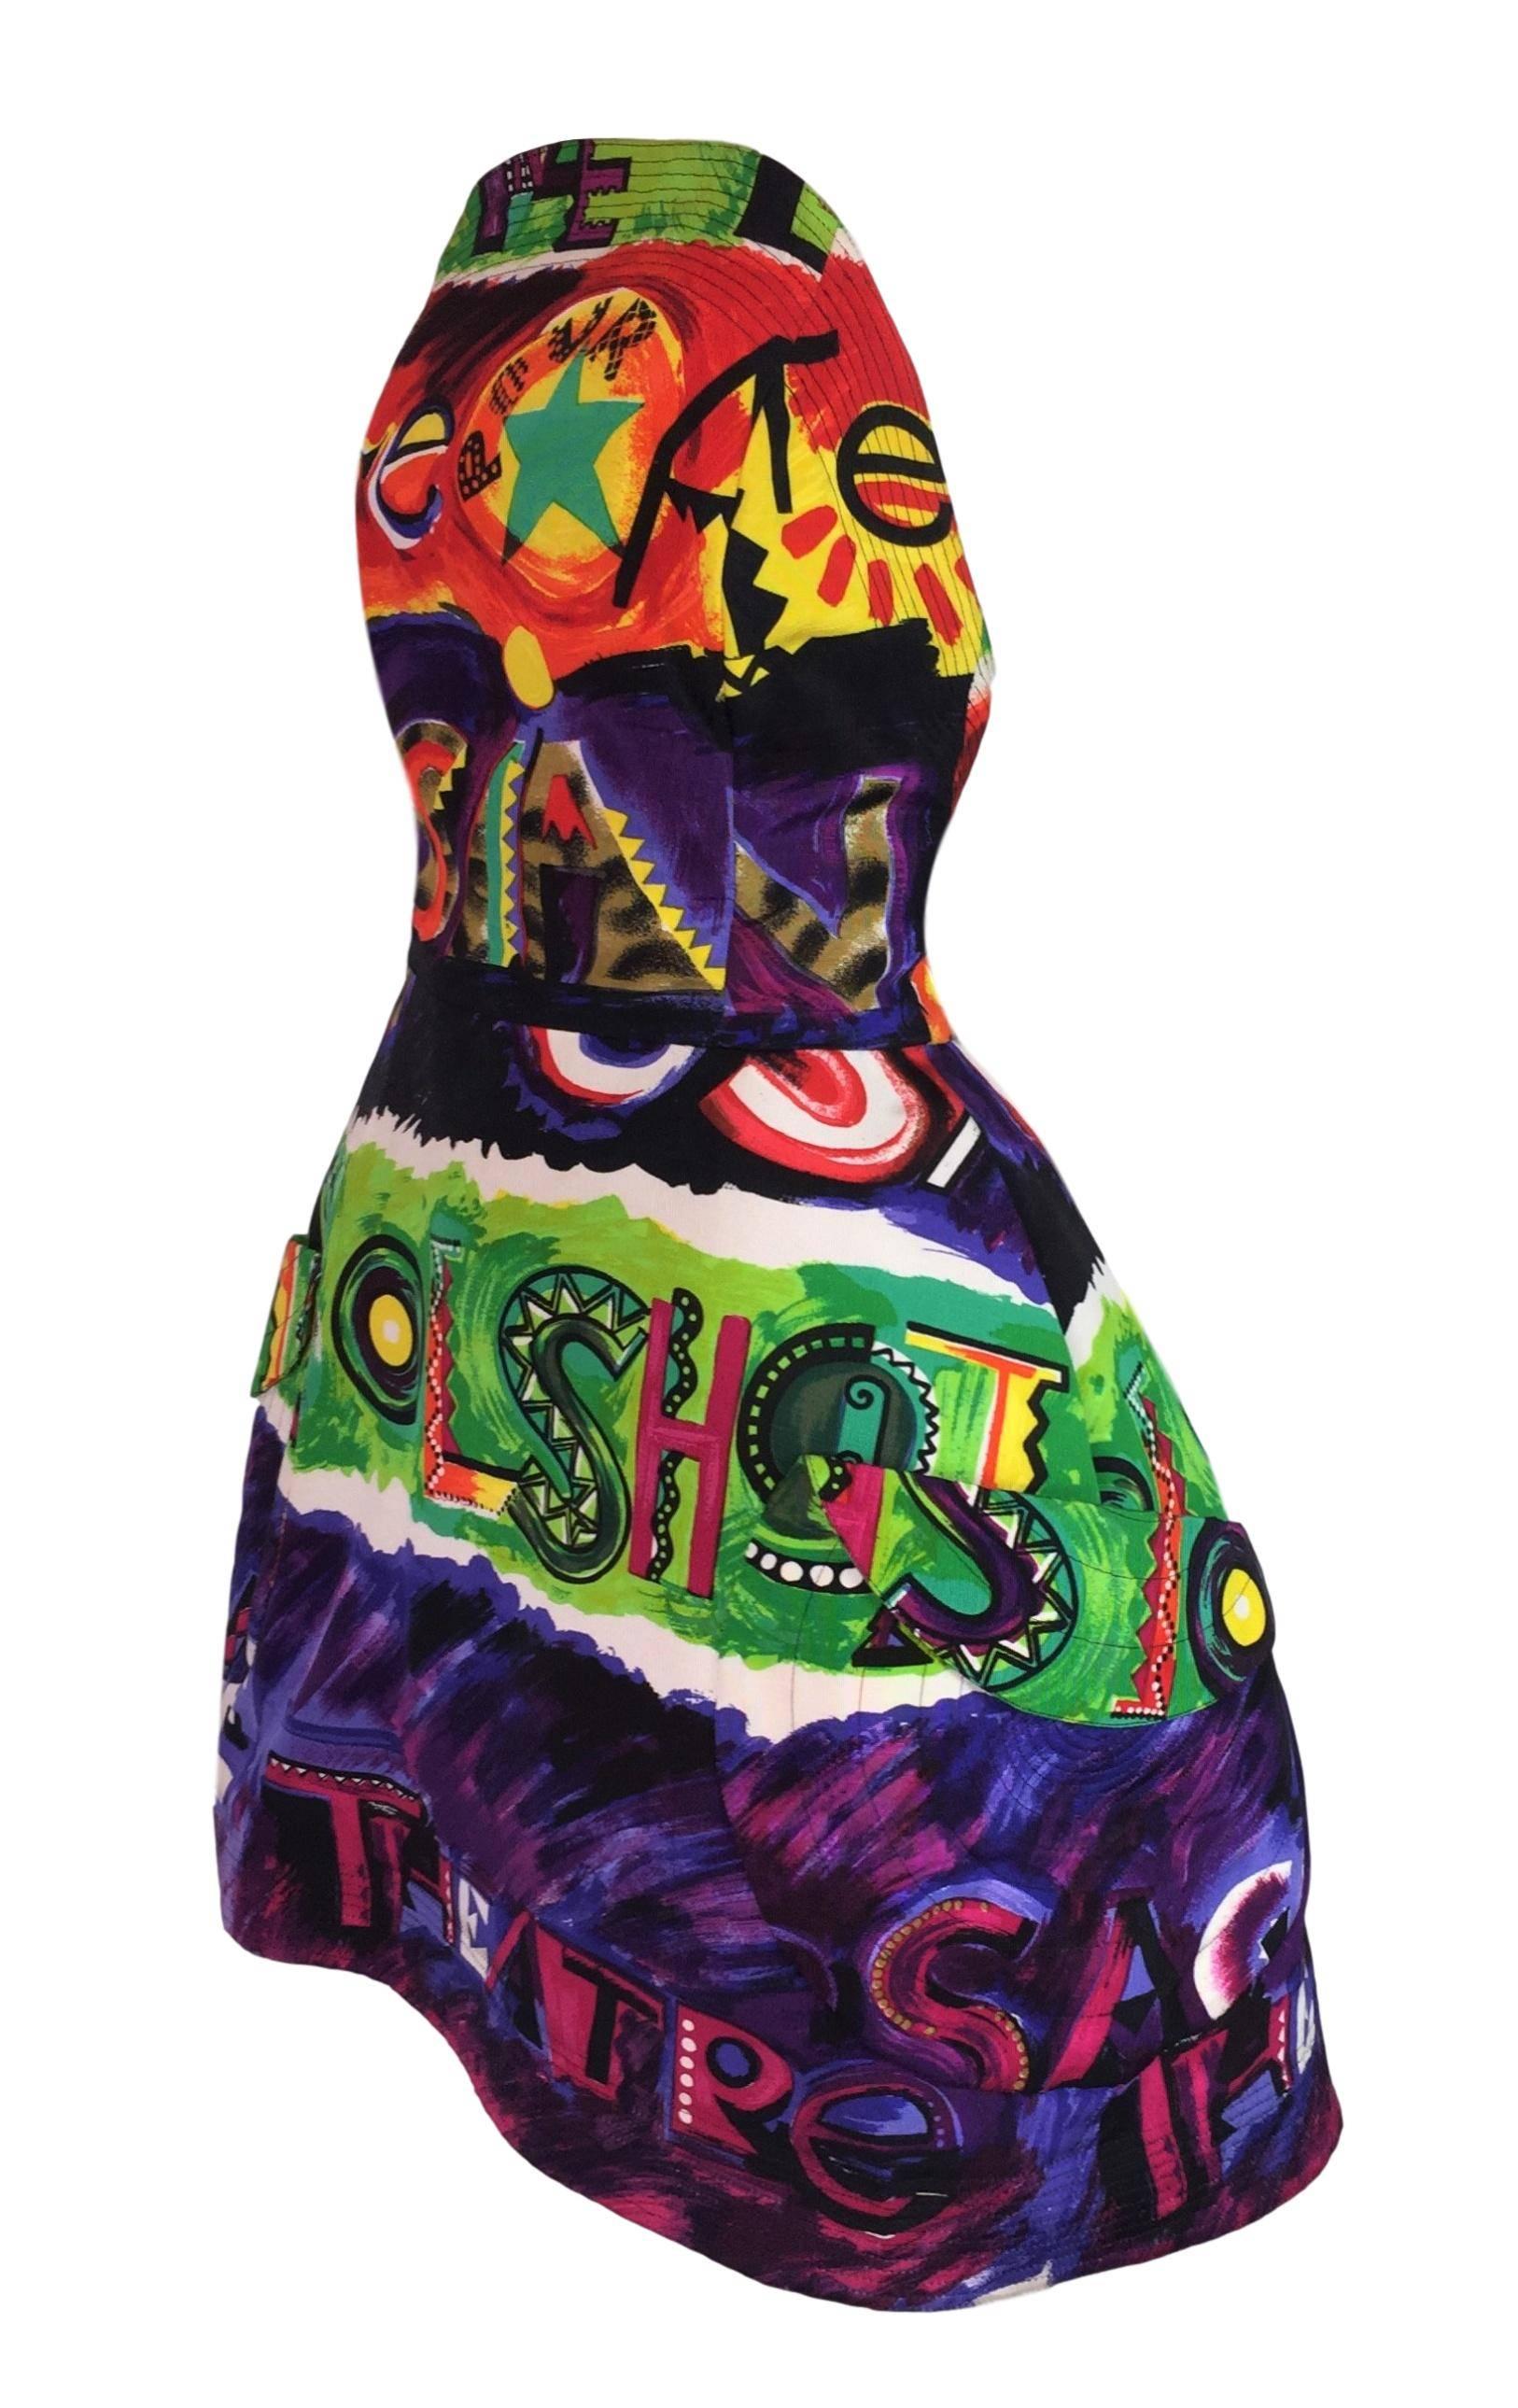 DESIGNER: S/S 1991 Gianni Versace- has handmade couture details including a separate waist band attached inside and puffy crinoline pockets to help give the puffed avant garde look. This same dress was worn on the runway. 

Please contact for more